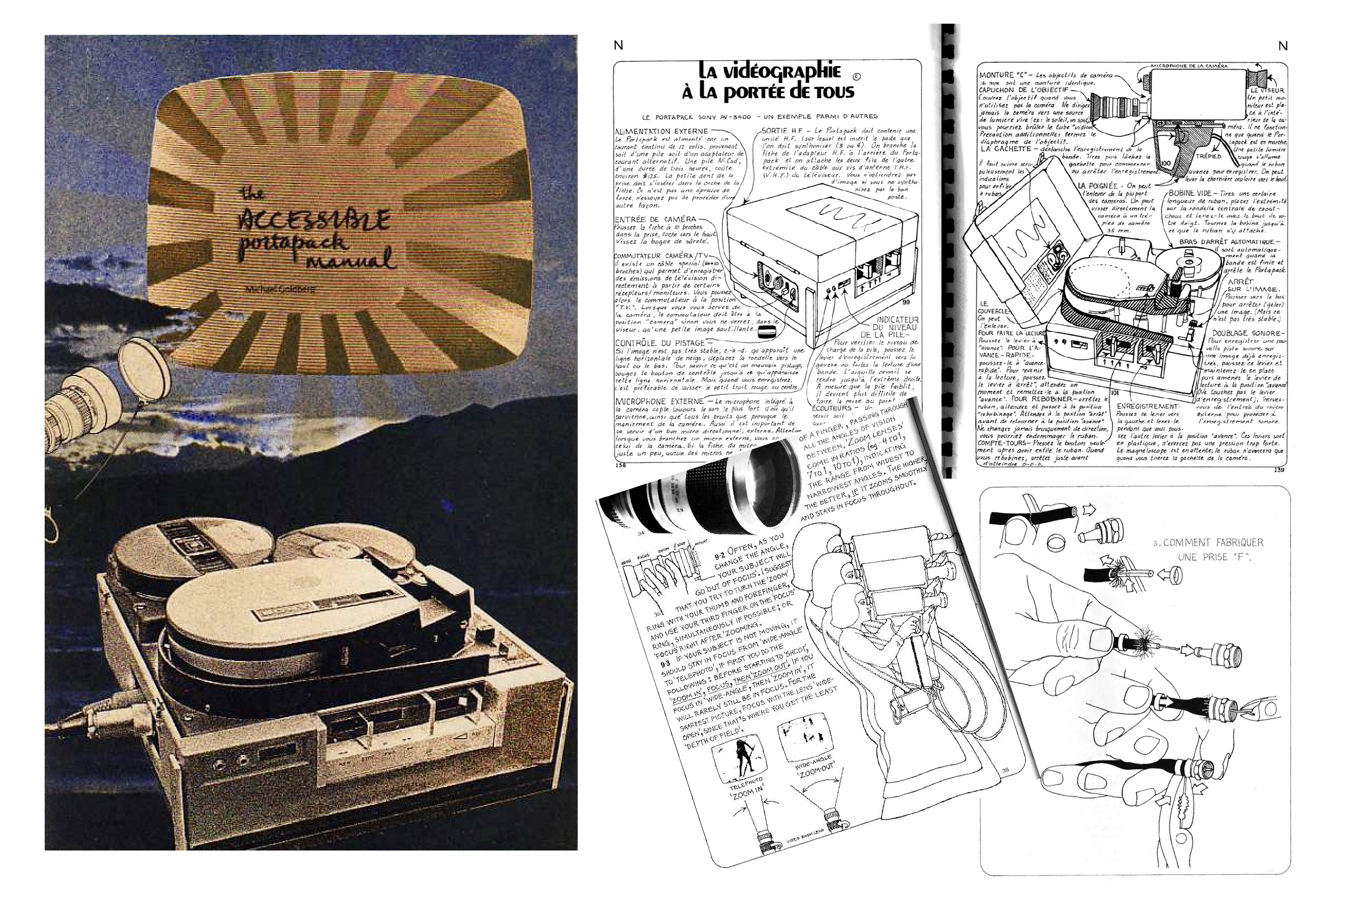 The image on the left is the cover of The Accessible Portapack Manual, a camera manual that greatly helped video artists in the early days of video. On the spreads on the right is one image from the manual (a girl with a camera), as well as text and illustrations from the French version “La vidéographie à la portée de tous”. Courtesy: Michael Goldberg